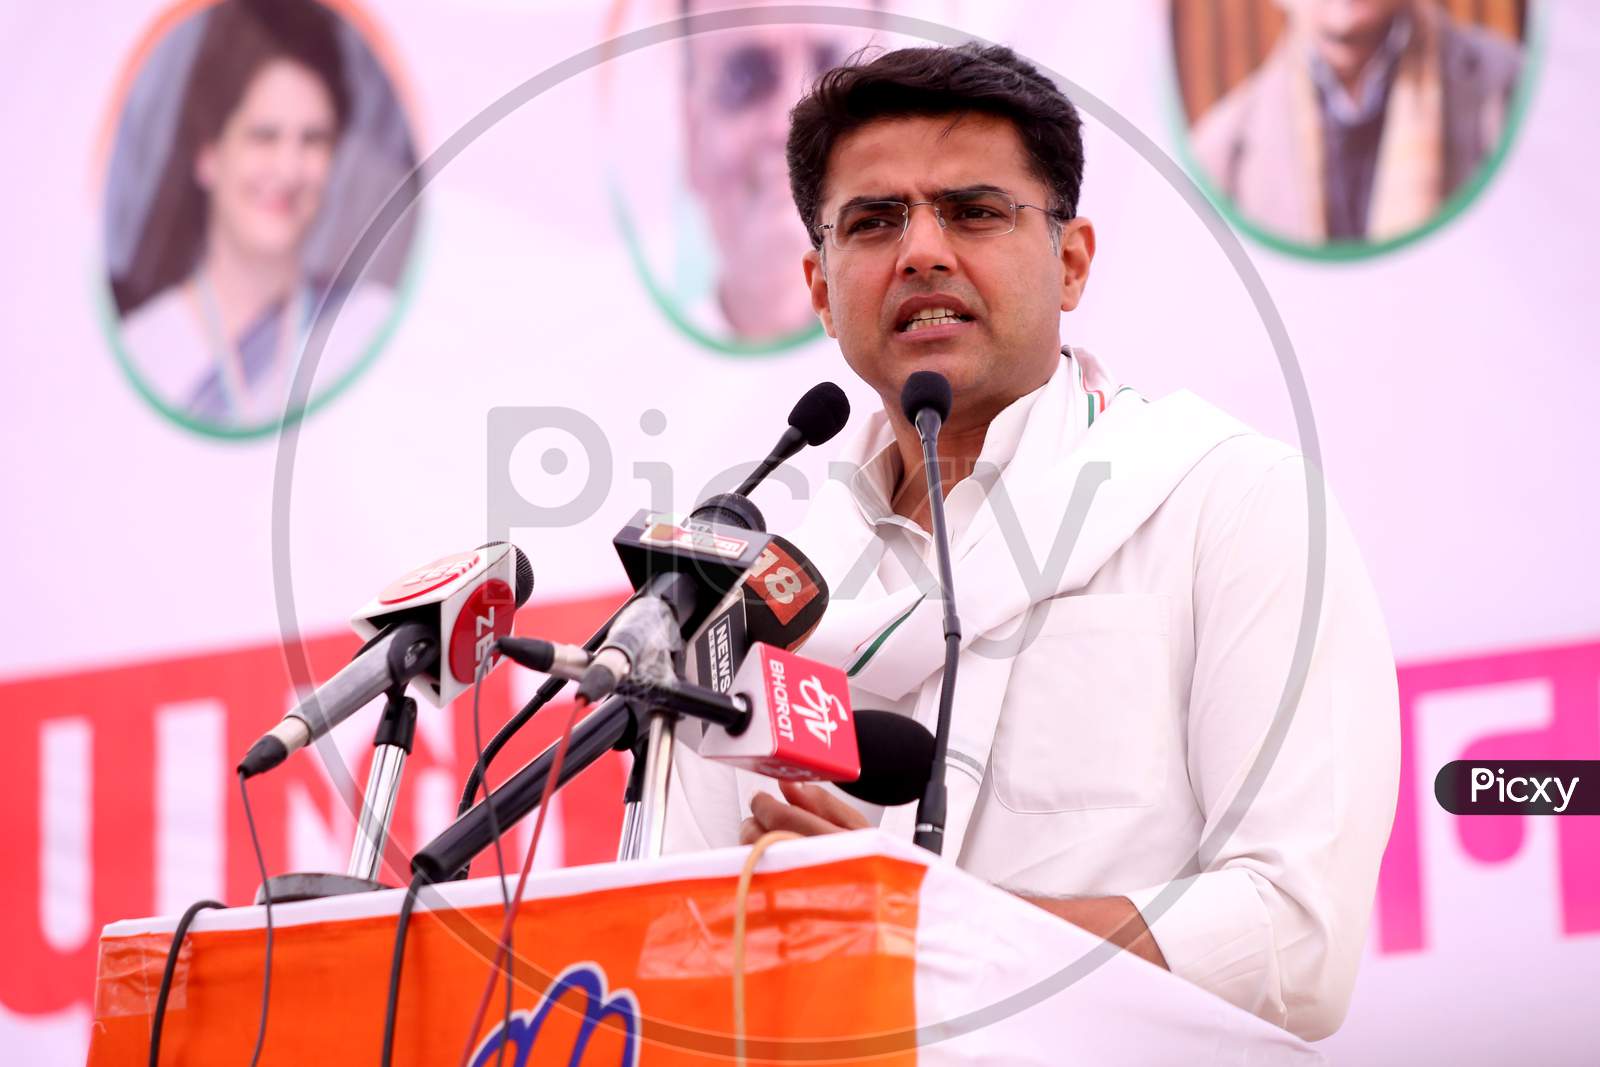 Rajasthan Deputy Chief Minister & State Congress President Sachin Pilot participate in a campaign rally ahead of Lok Sabha Elections in 2019, Pushkar, Rajasthan